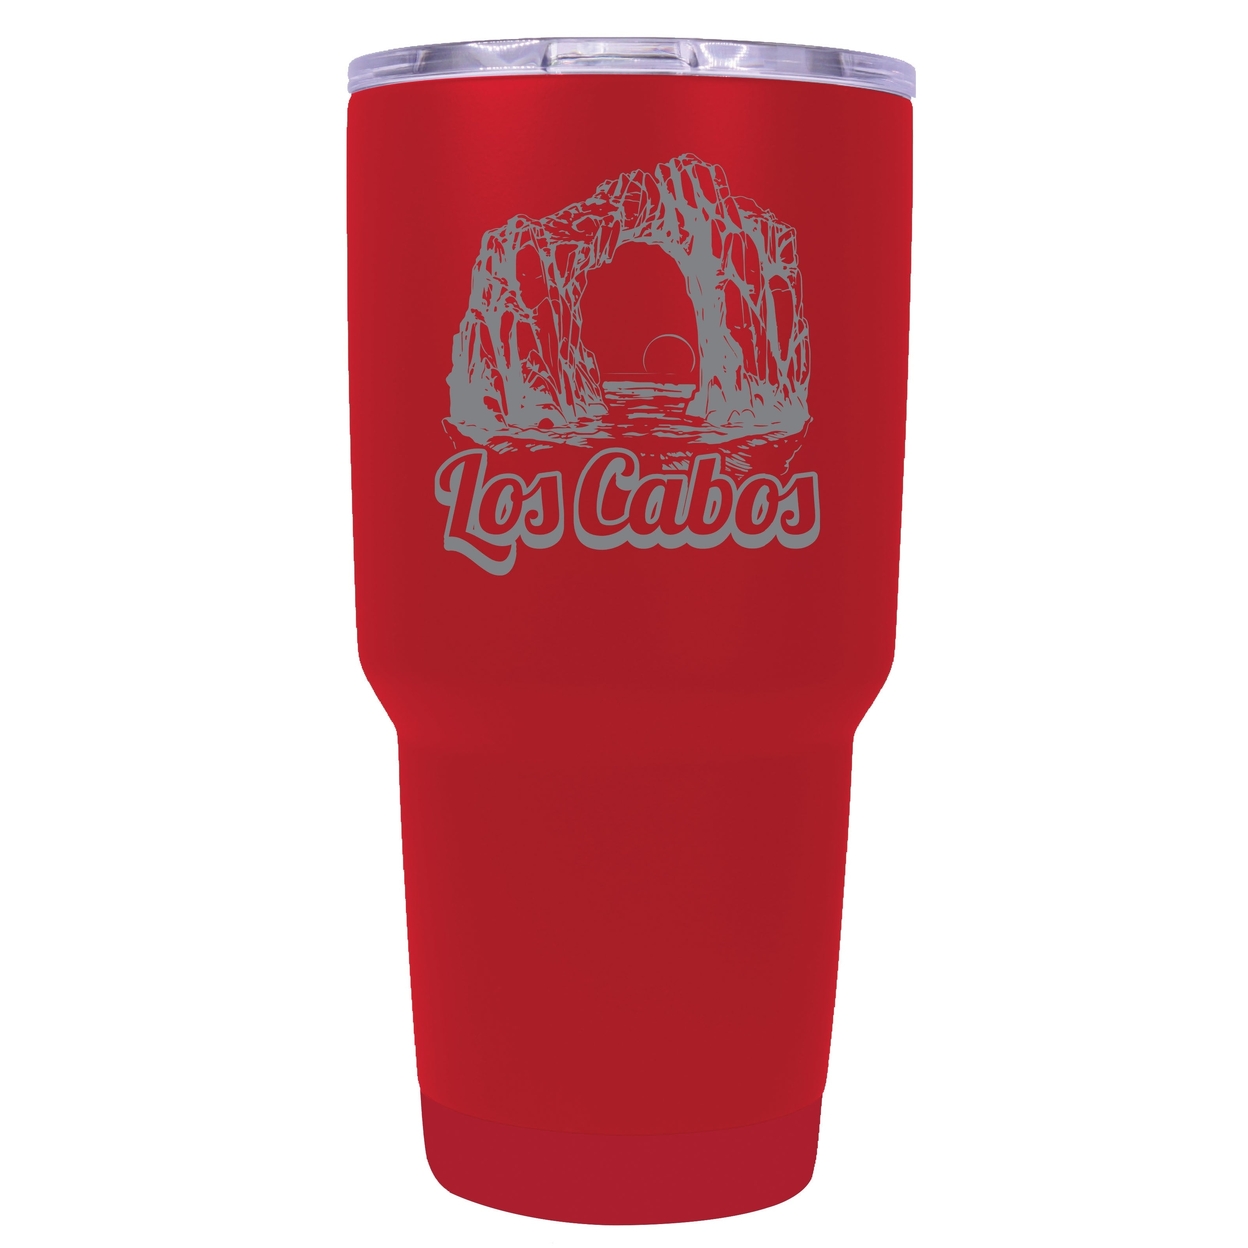 Los Cabos Mexico Souvenir 24 Oz Engraved Insulated Stainless Steel Tumbler - Red,,Single Unit